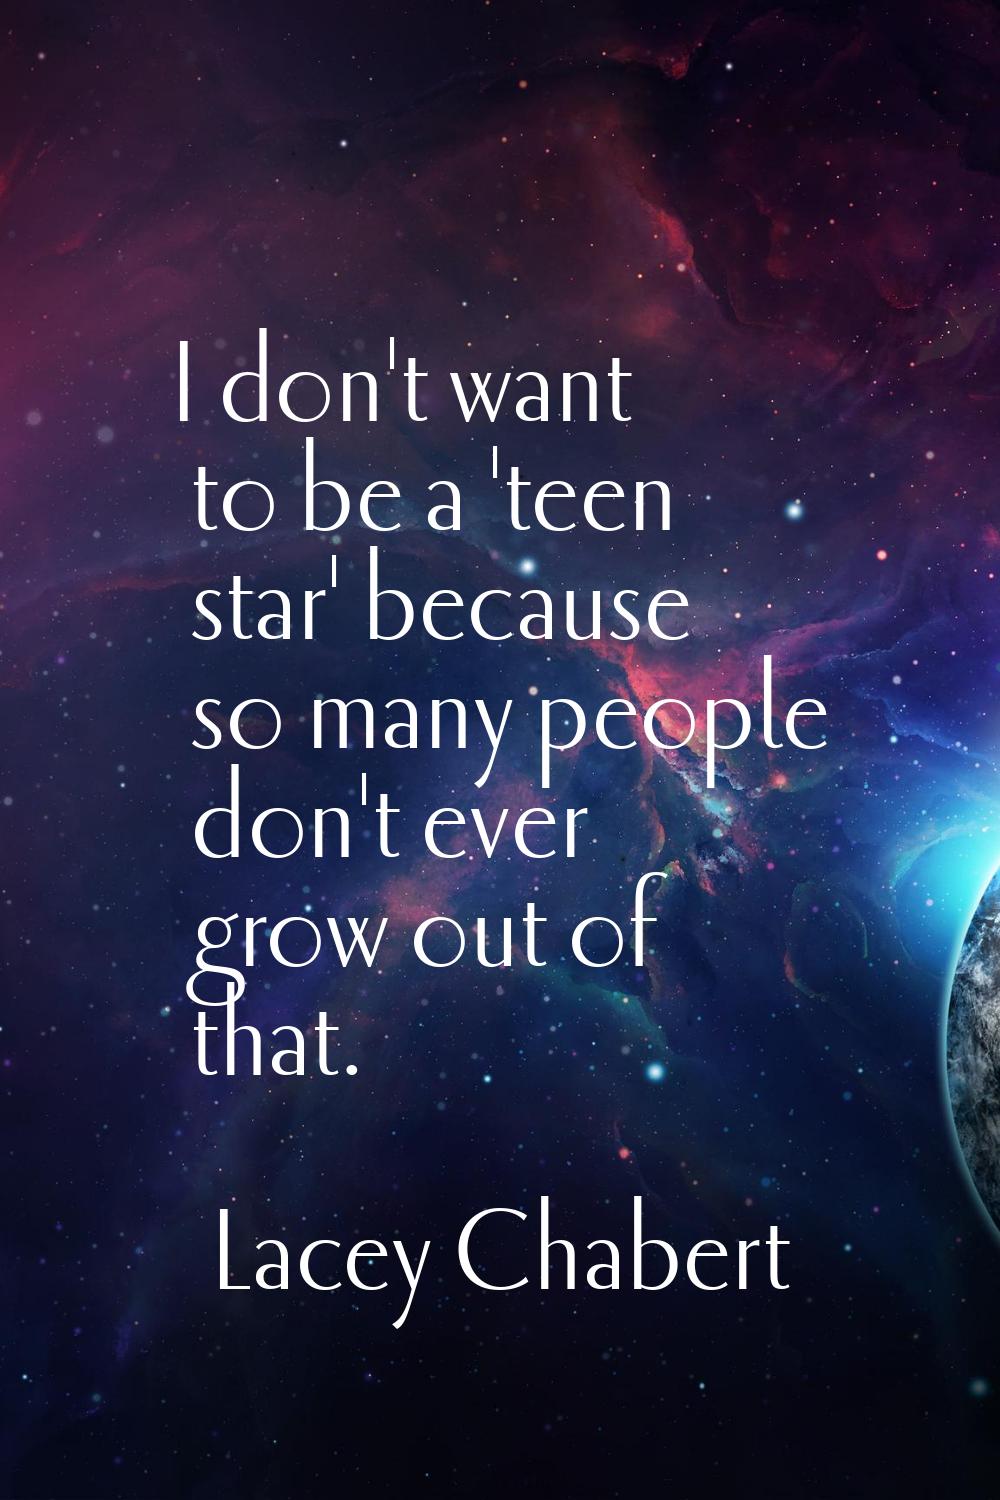 I don't want to be a 'teen star' because so many people don't ever grow out of that.